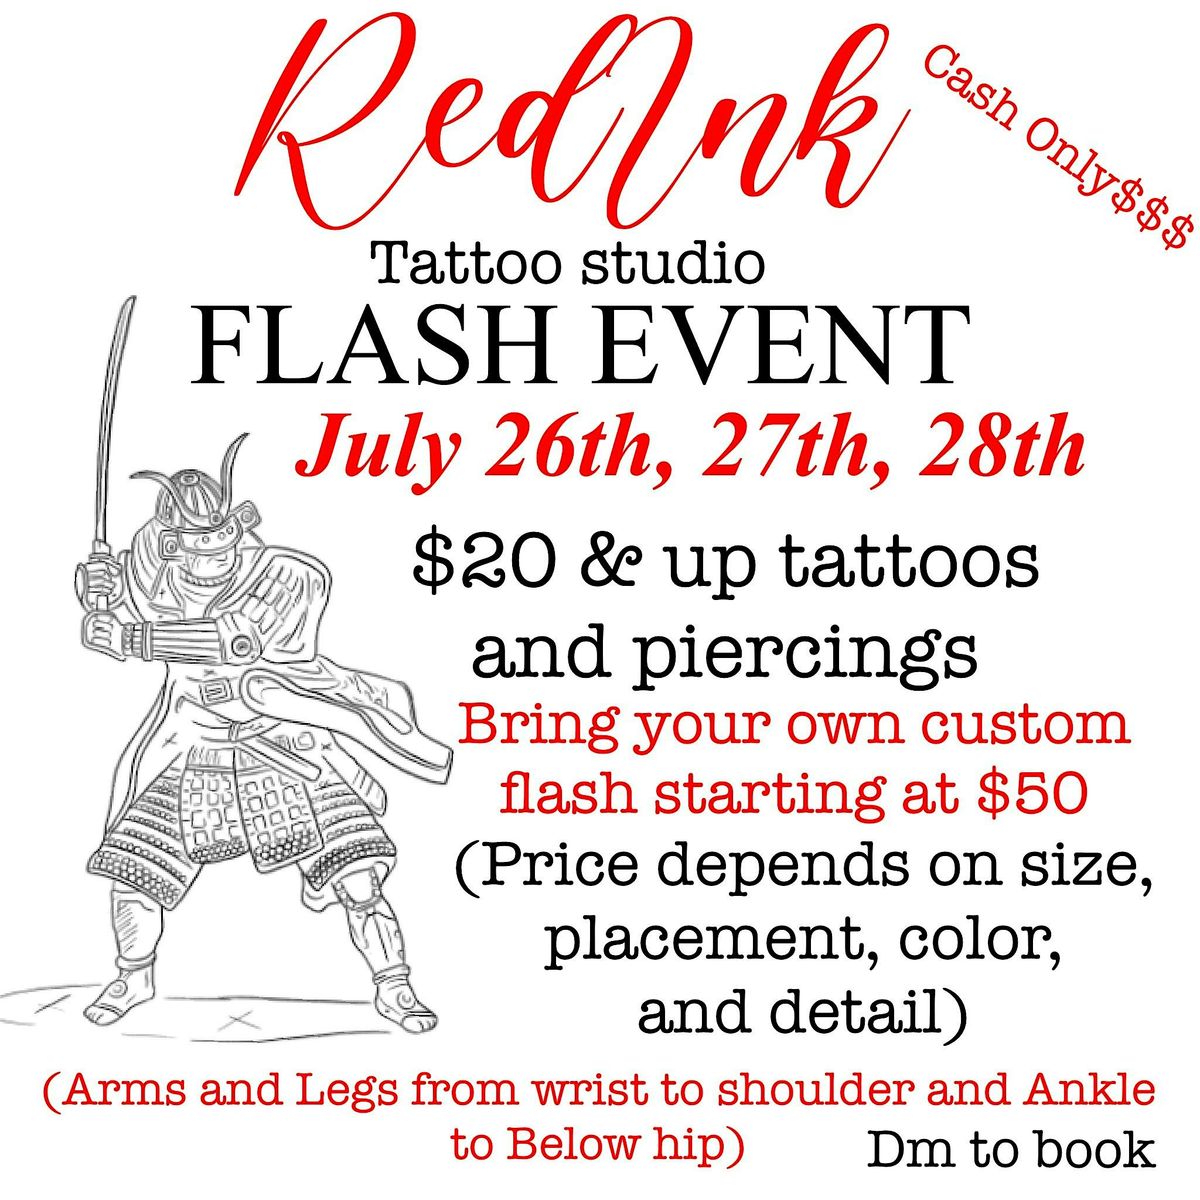 FLASH $20  AND UP TATTOOS AND PIERCINGS JULY 26TH, 27TH, AND 28TH